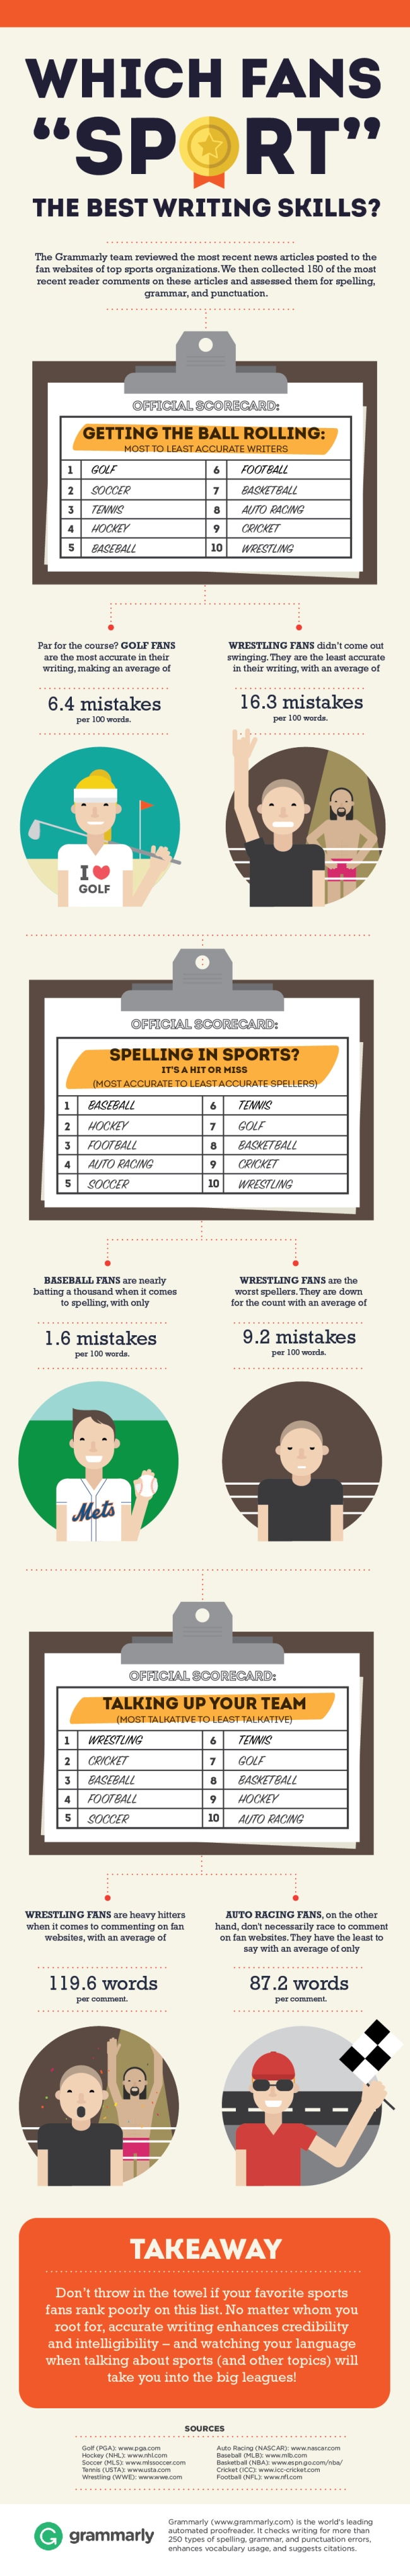 Which Fans Sport the Best Writing Skills Infographic